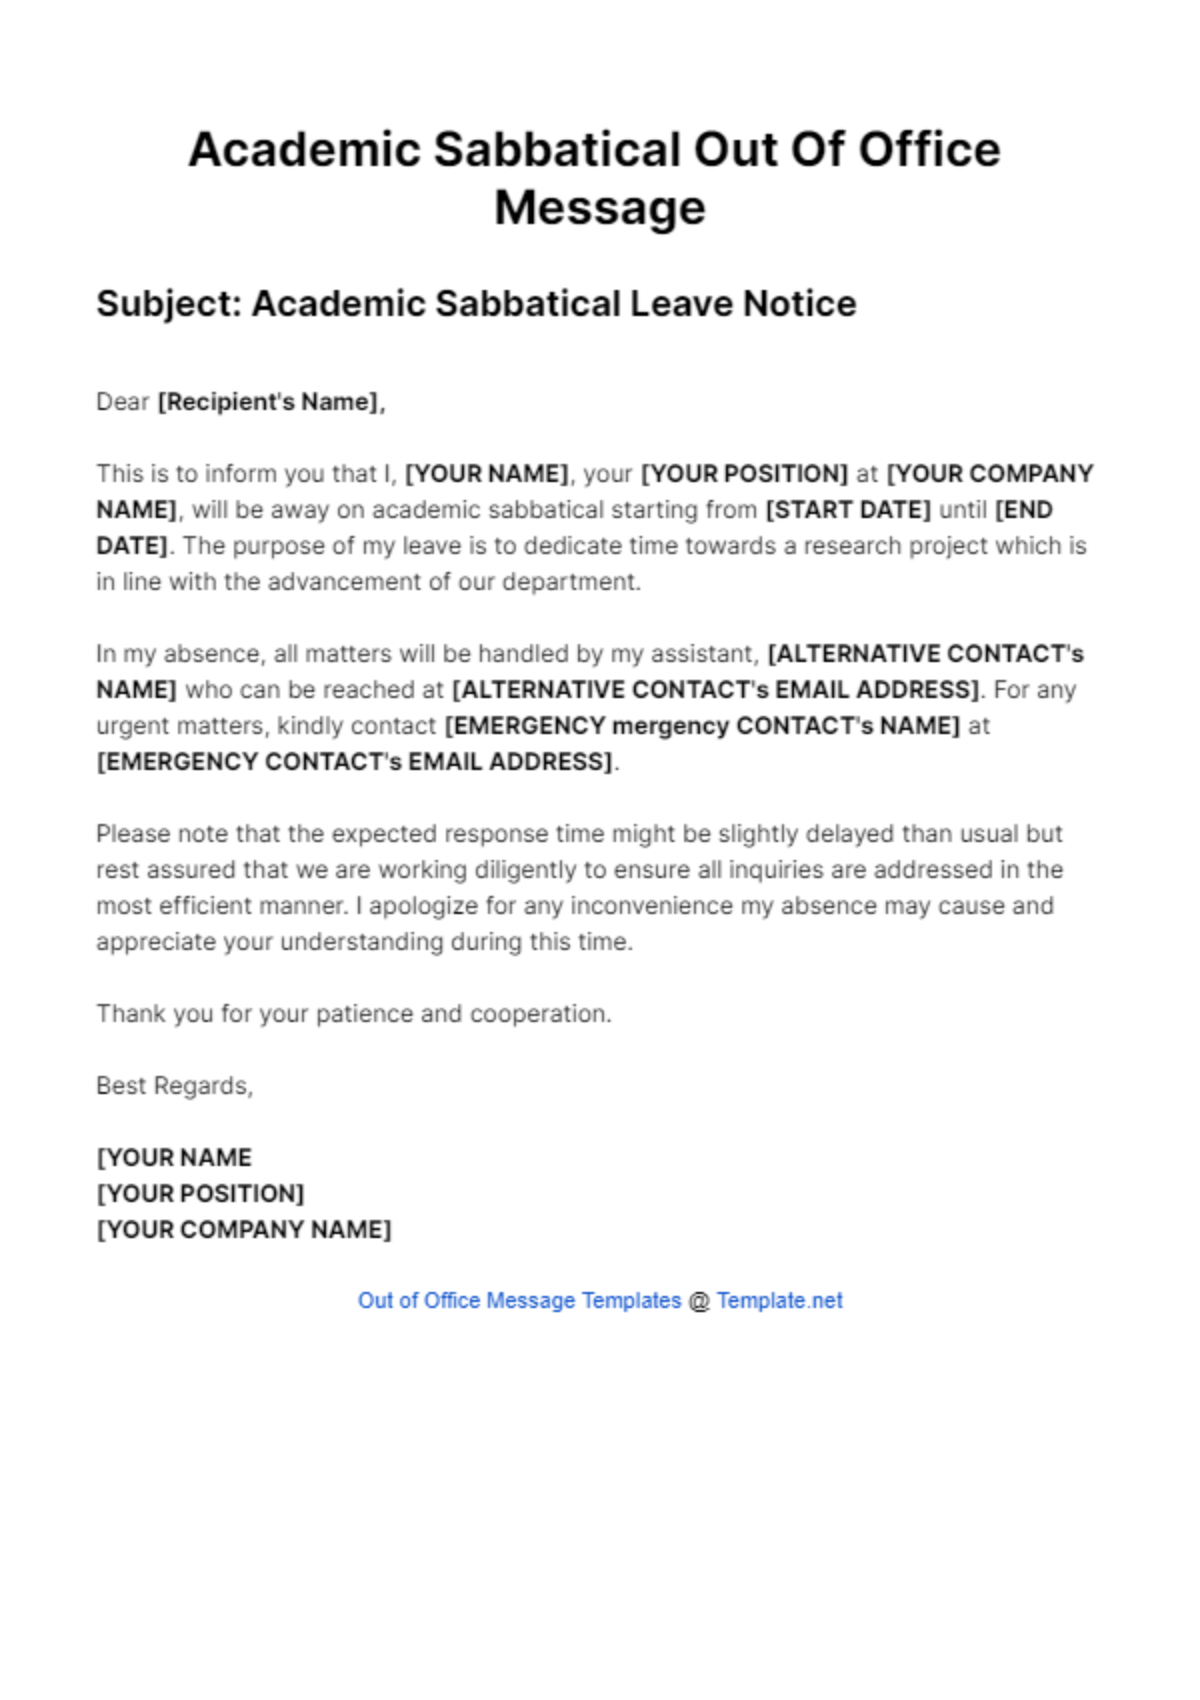 Academic Sabbatical Out Of Office Message Template